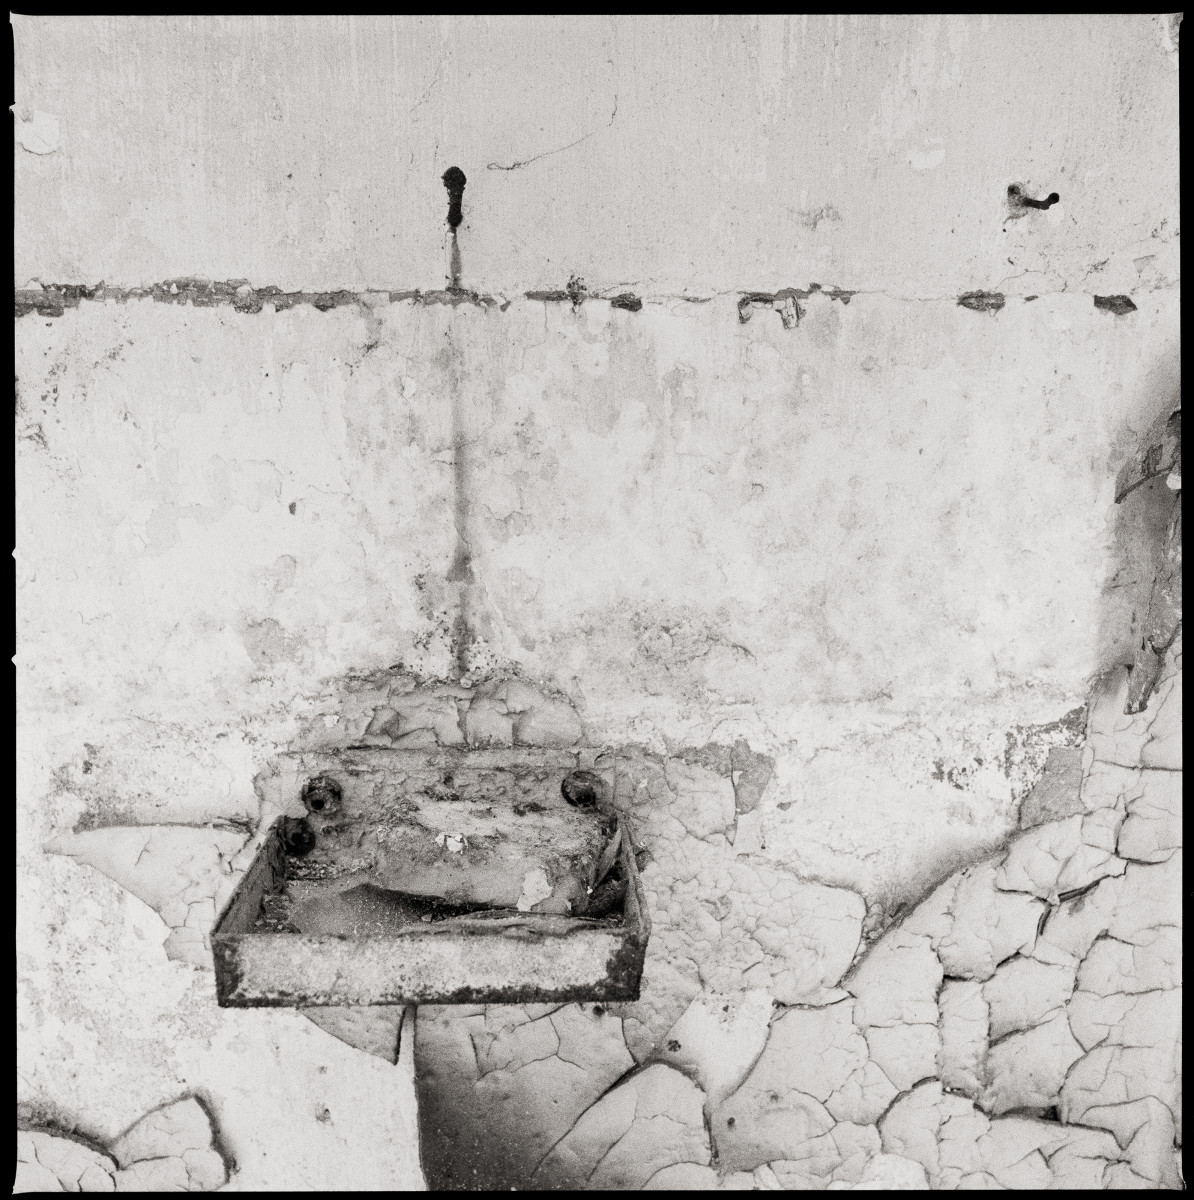 Soap Dish by Eric T. Kunsman  Image: ID: A black and white image shows a dirty metal soap dish that is mounted on a cement wall that is cracking.